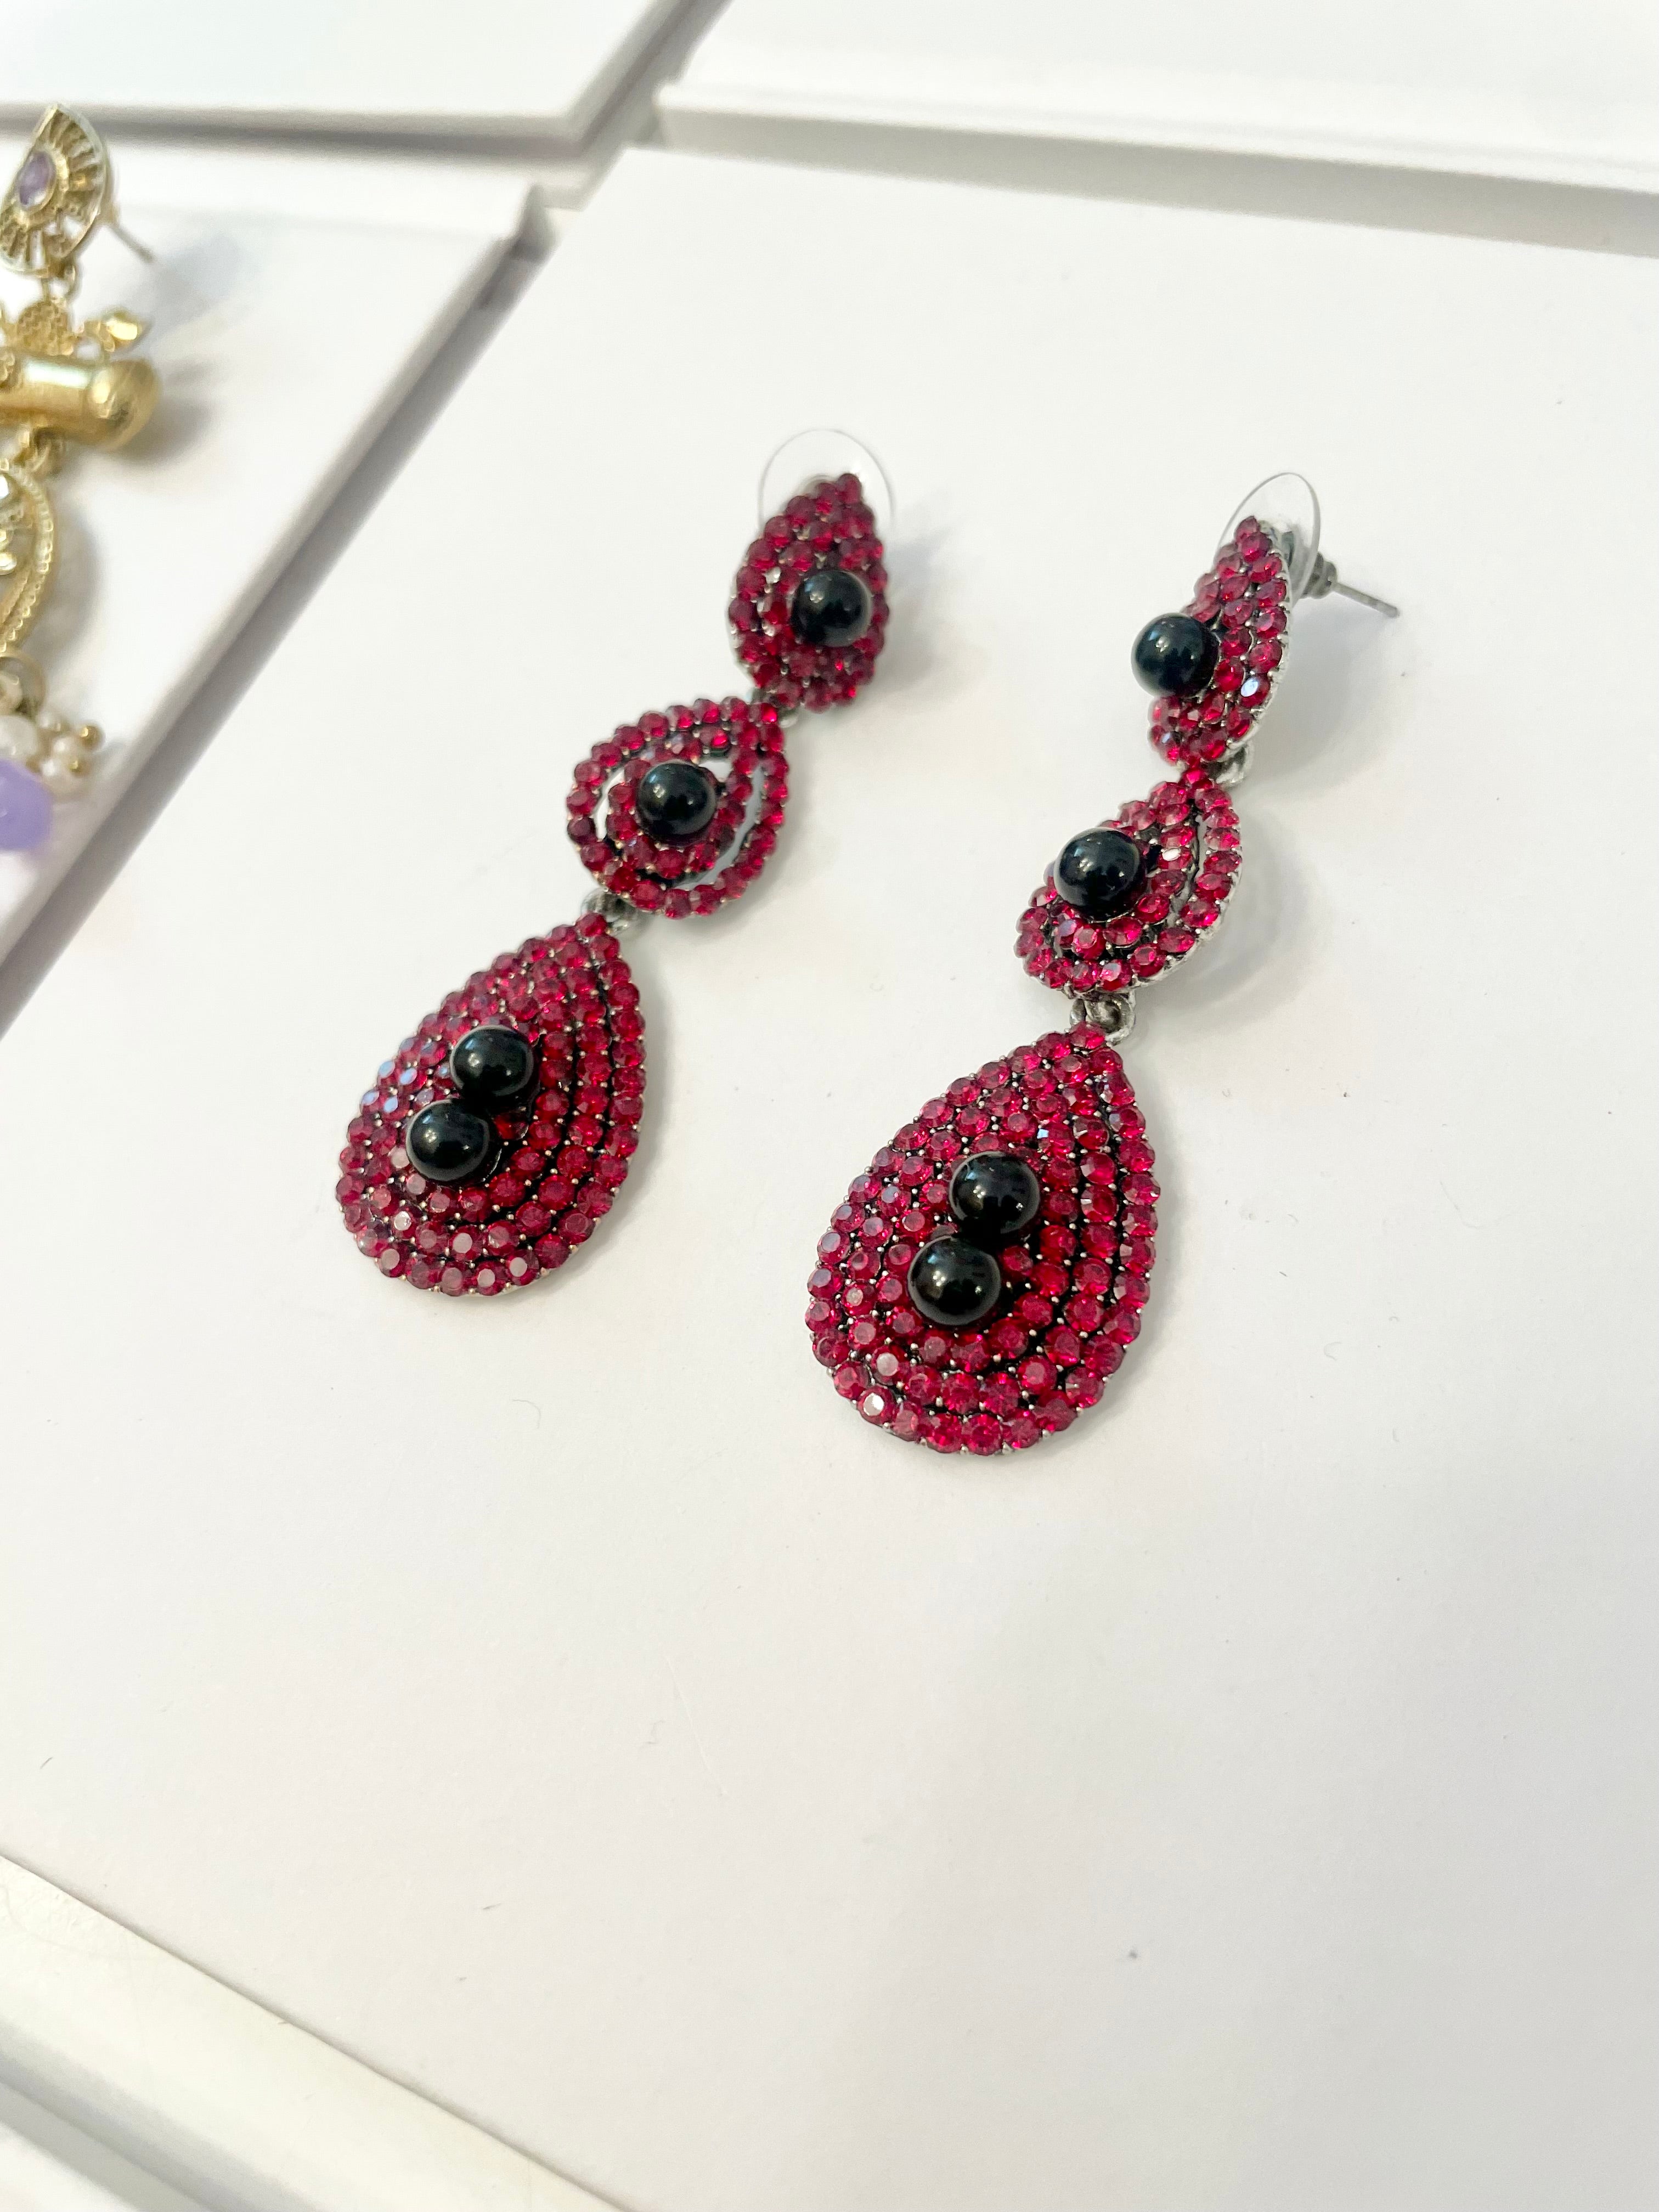 The most divine ruby glass drop earrings.... so classy